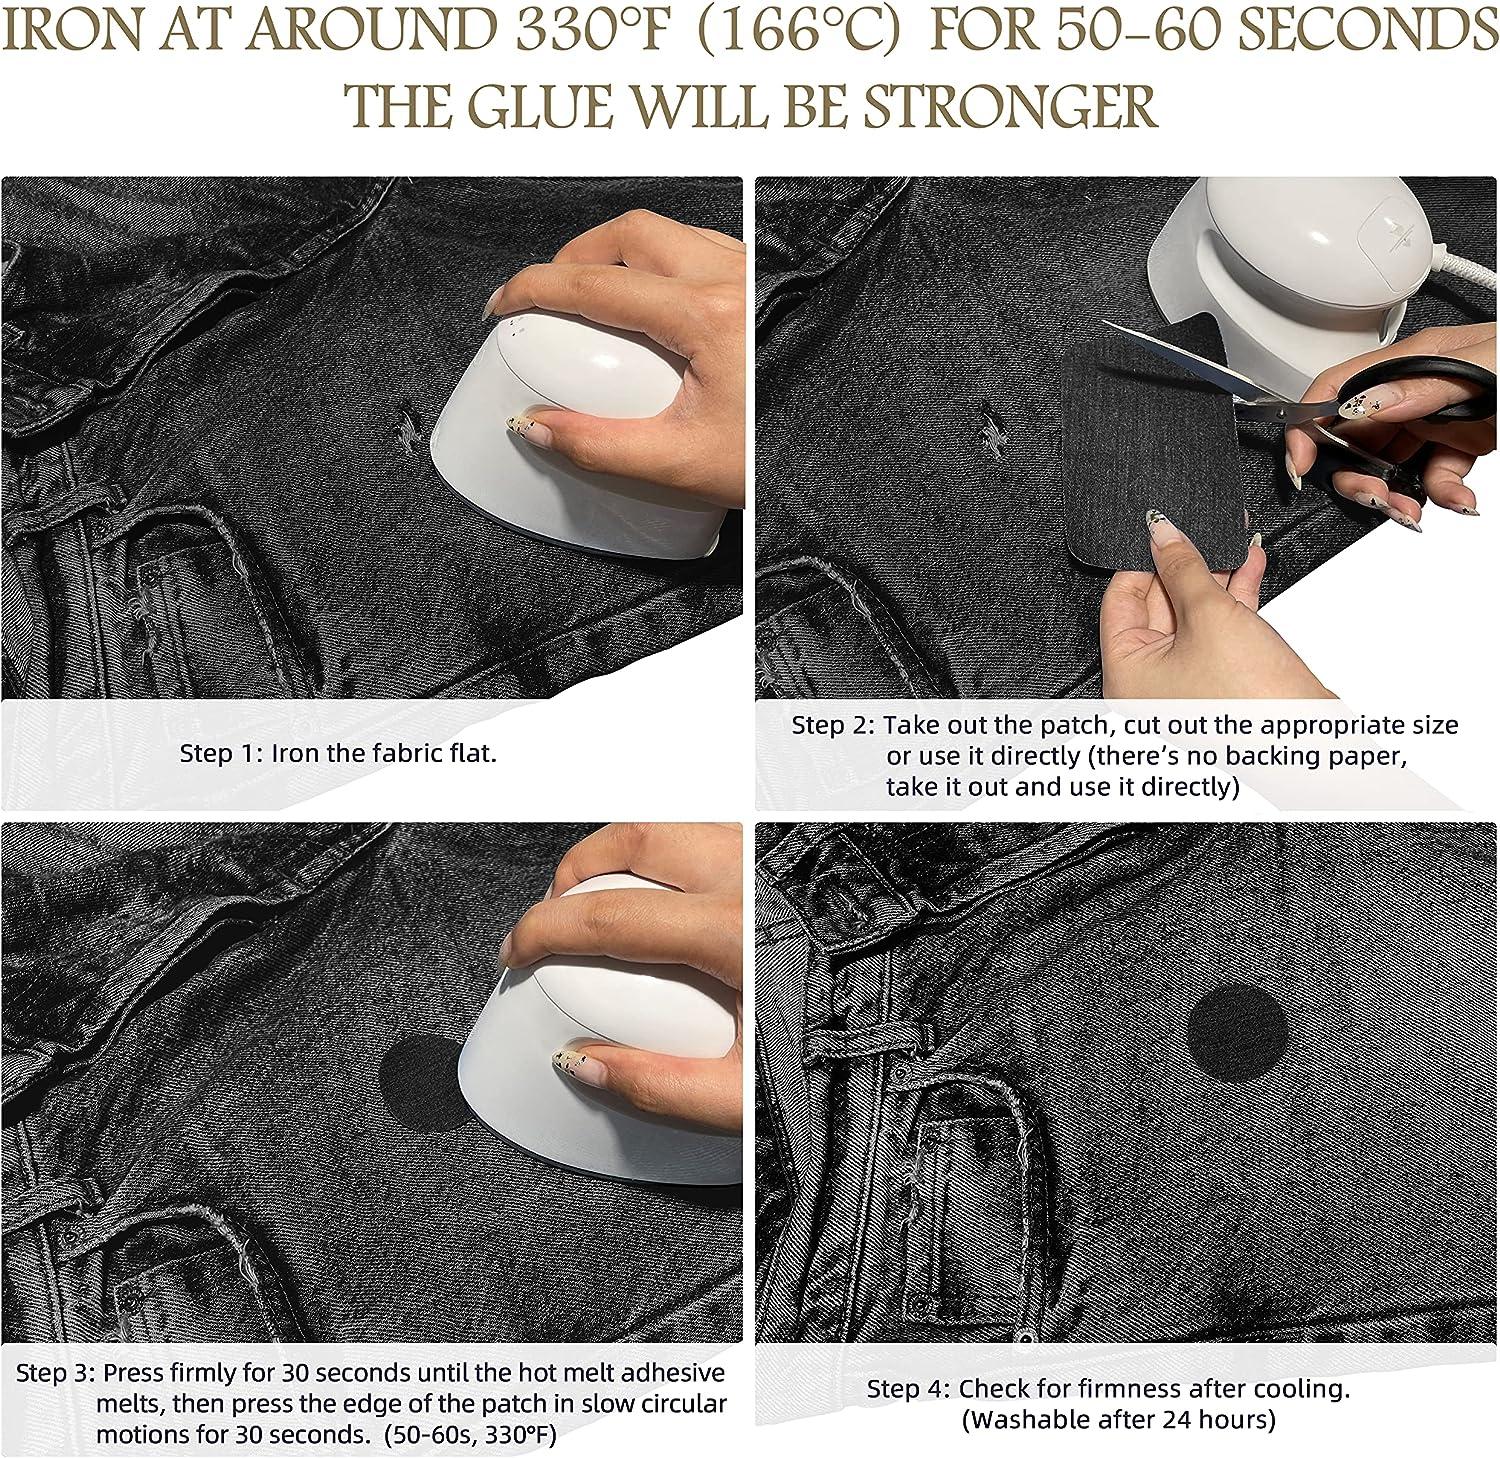 SAVE money) iron on patches are EASY to fix your pants 